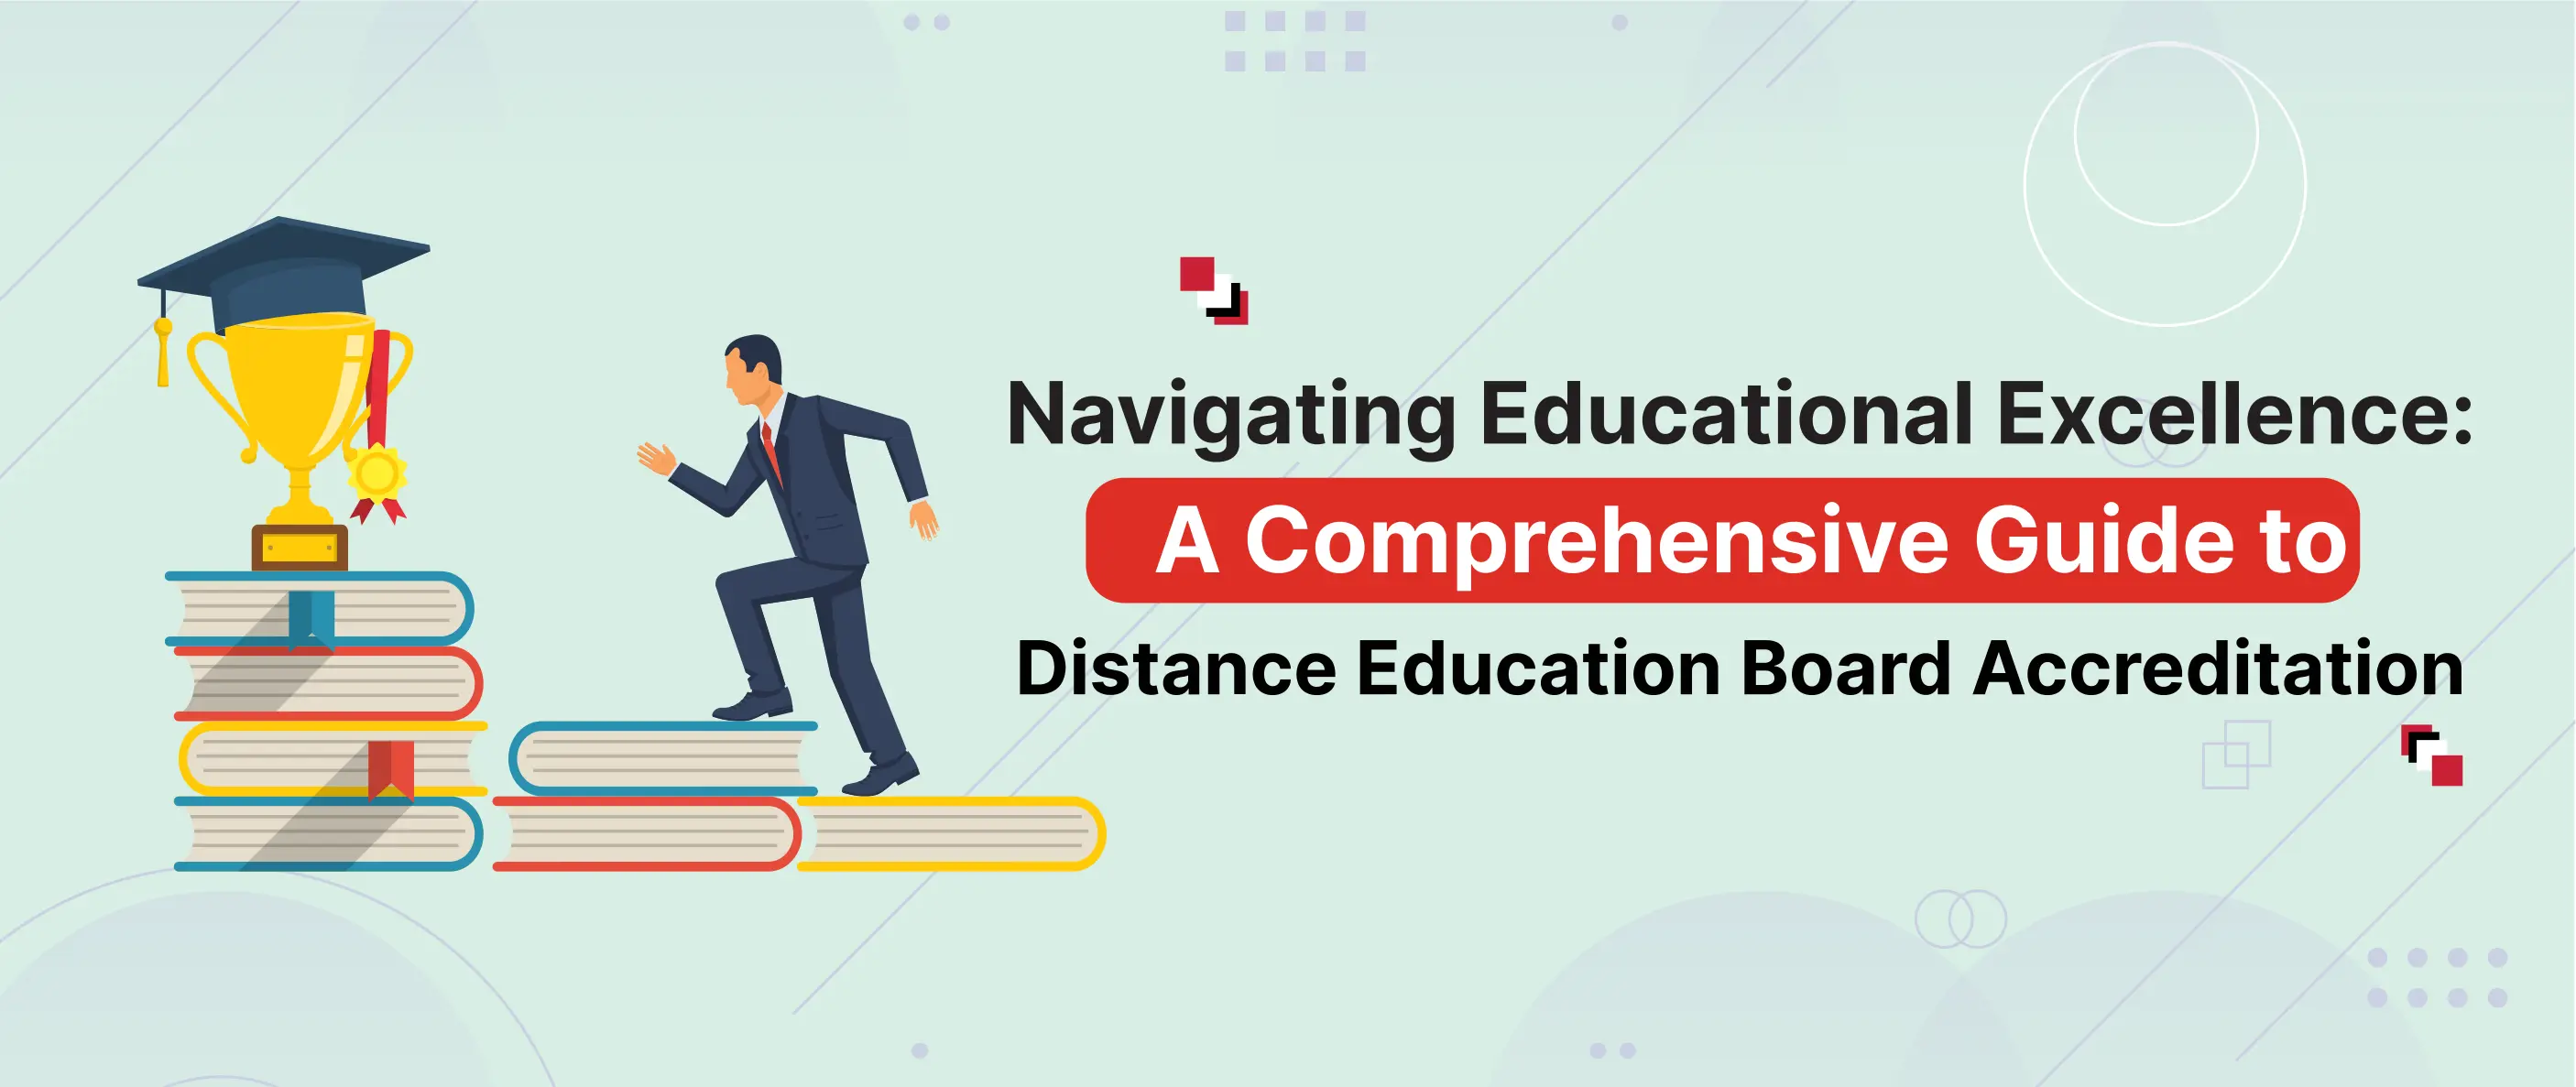 Navigating Educational Excellence: A Comprehensive Guide to Distance Education Board Accreditation